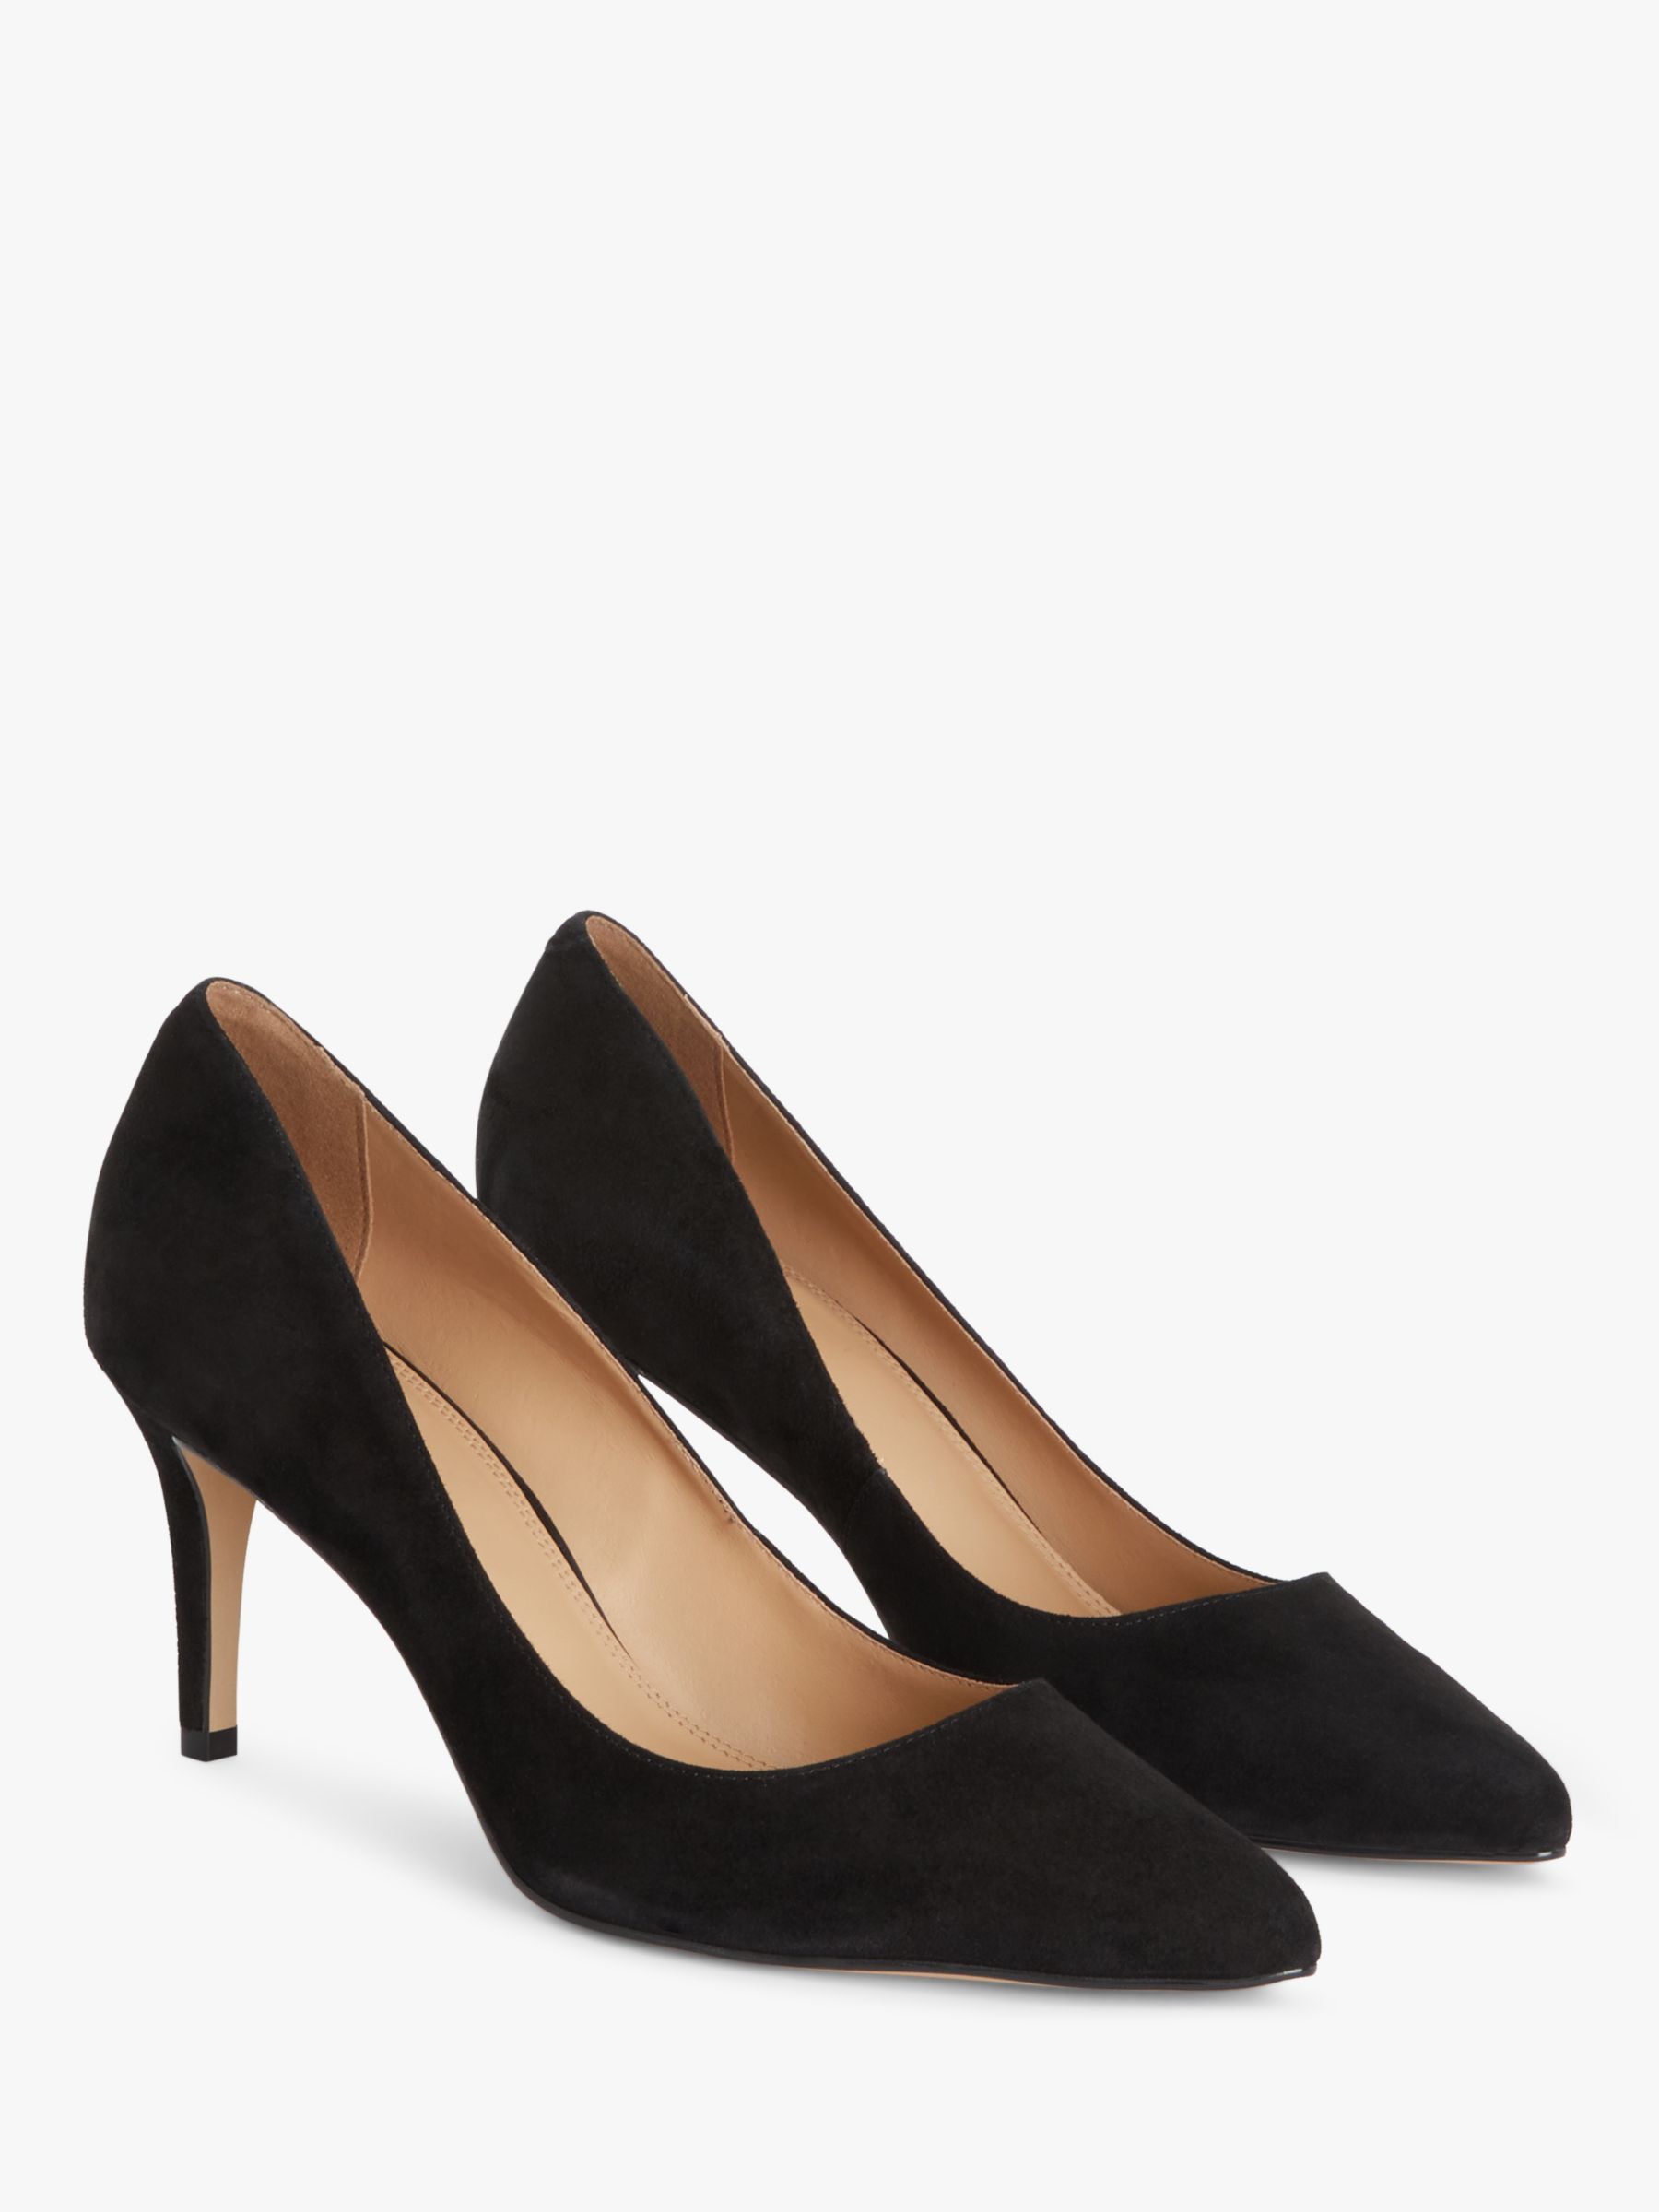 John Lewis Blessing Suede Stiletto Heel Pointed Toe Court Shoes, Black, 6